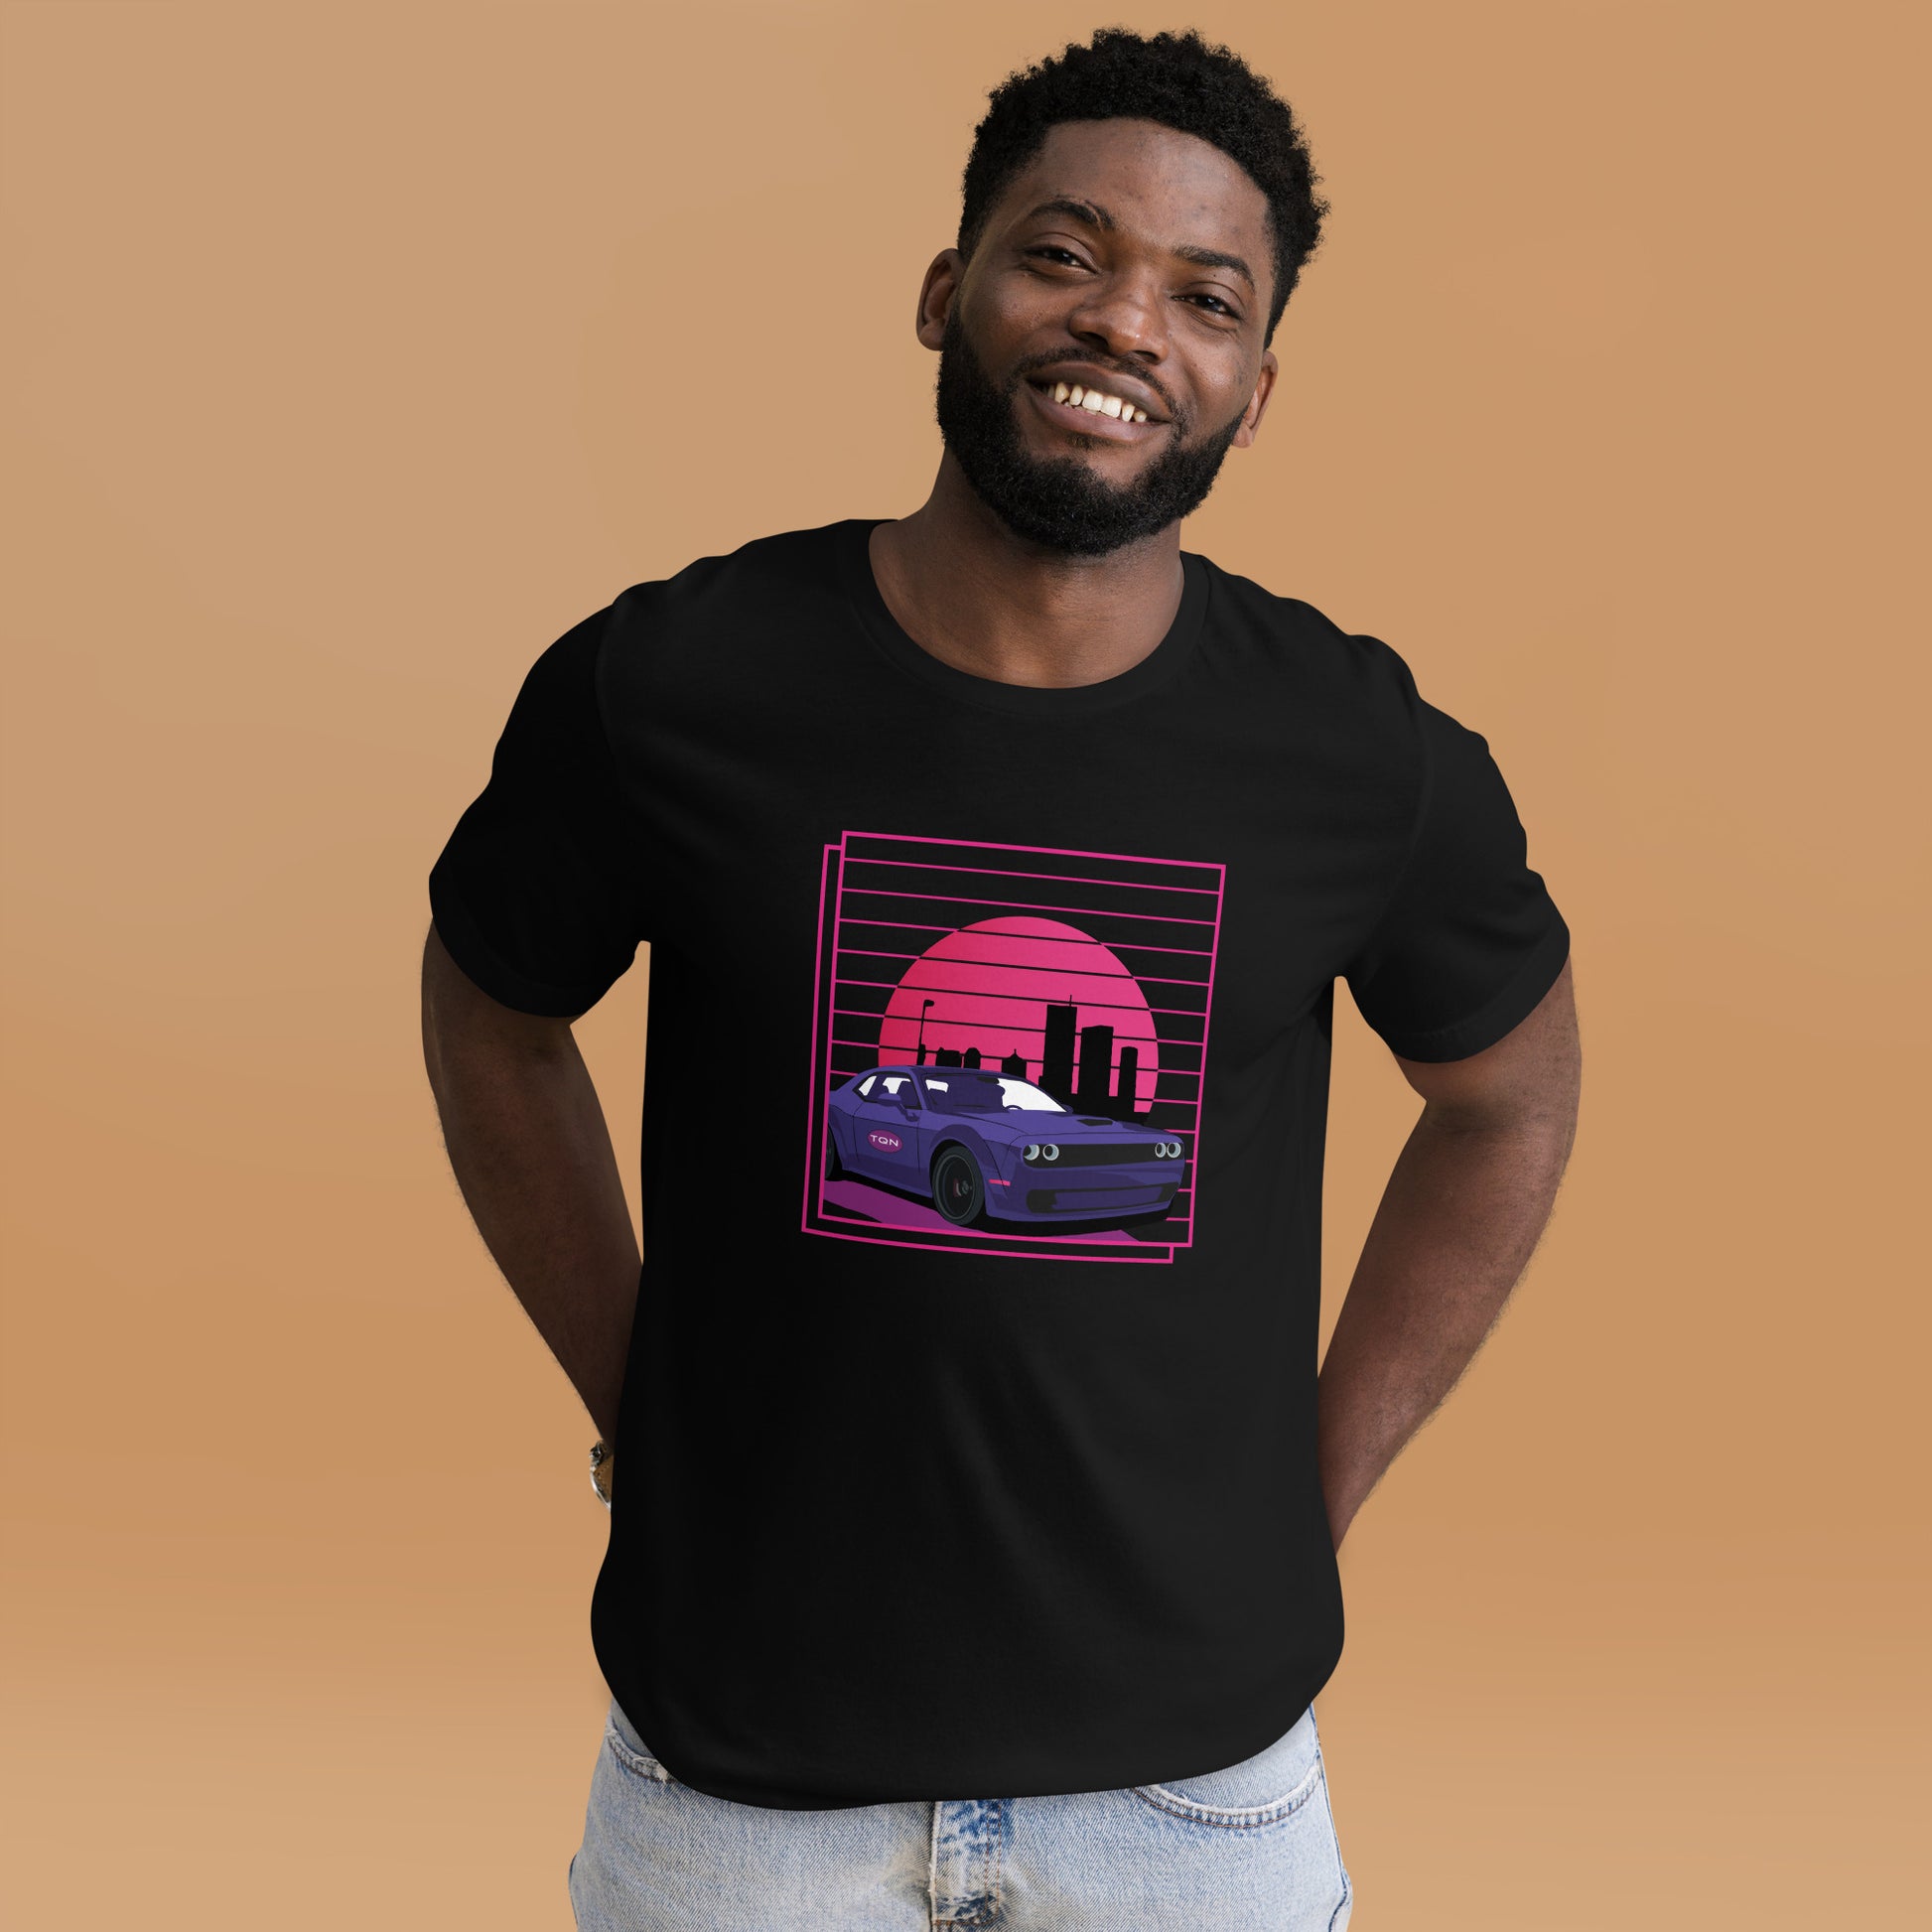 Rev up your style with our Retro Challenger tee! This black shirt showcases a timeless muscle car cruising through a stunning retro sunset backdrop. From our TEQNEON Retro Classics collection, it's a must-have for classic car enthusiasts and sunset admirers alike.